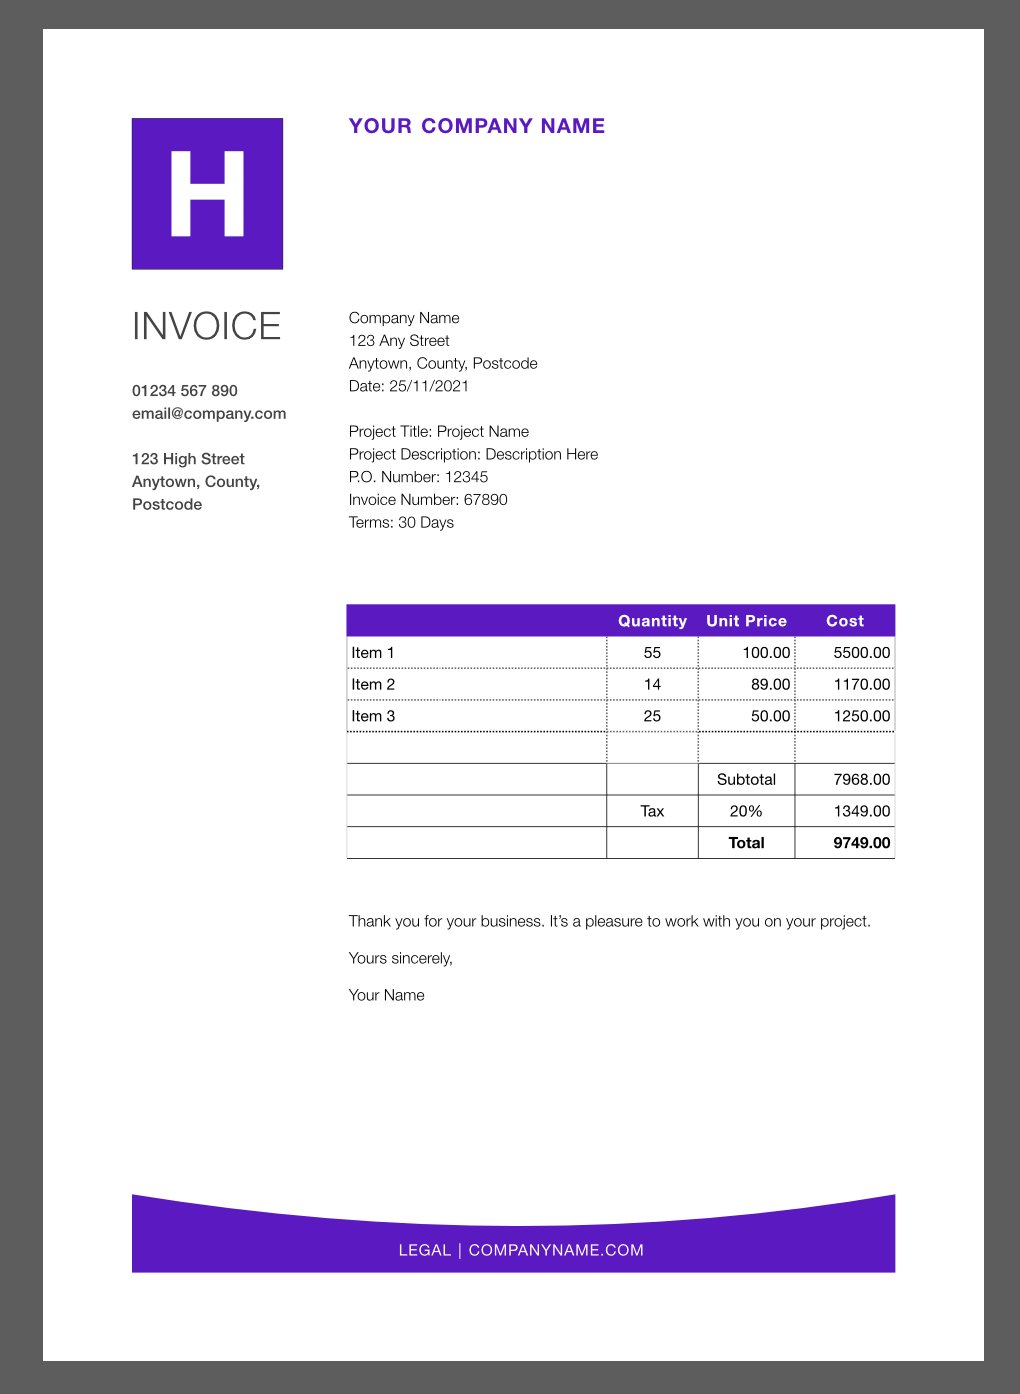 Invoice templates for Affinity preview image.